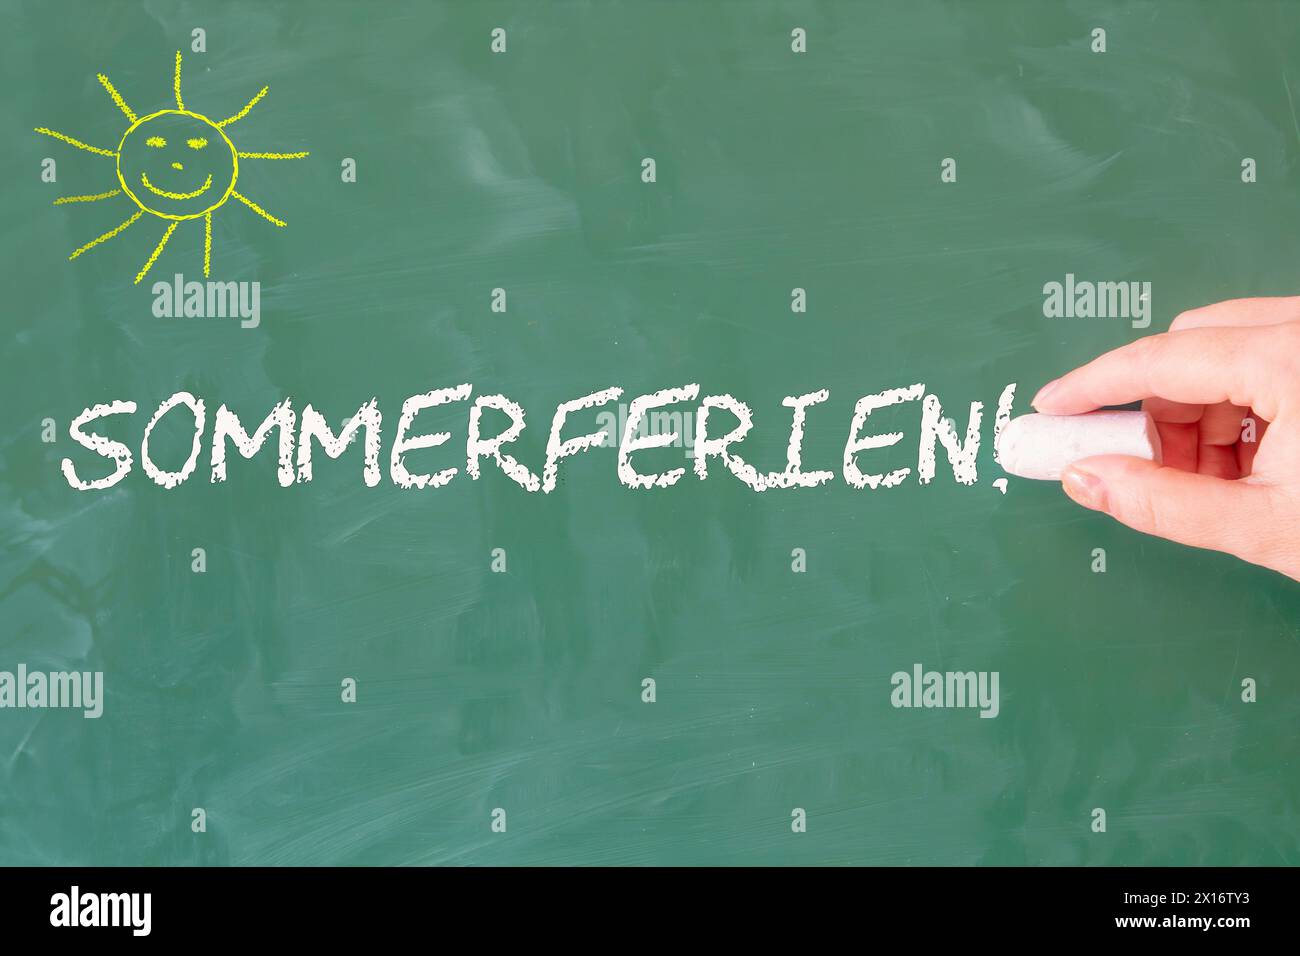 Symbol image of summer holidays (Germany): The word SOMMERFERIEN (summer holidays) is written on a school blackboard Stock Photo